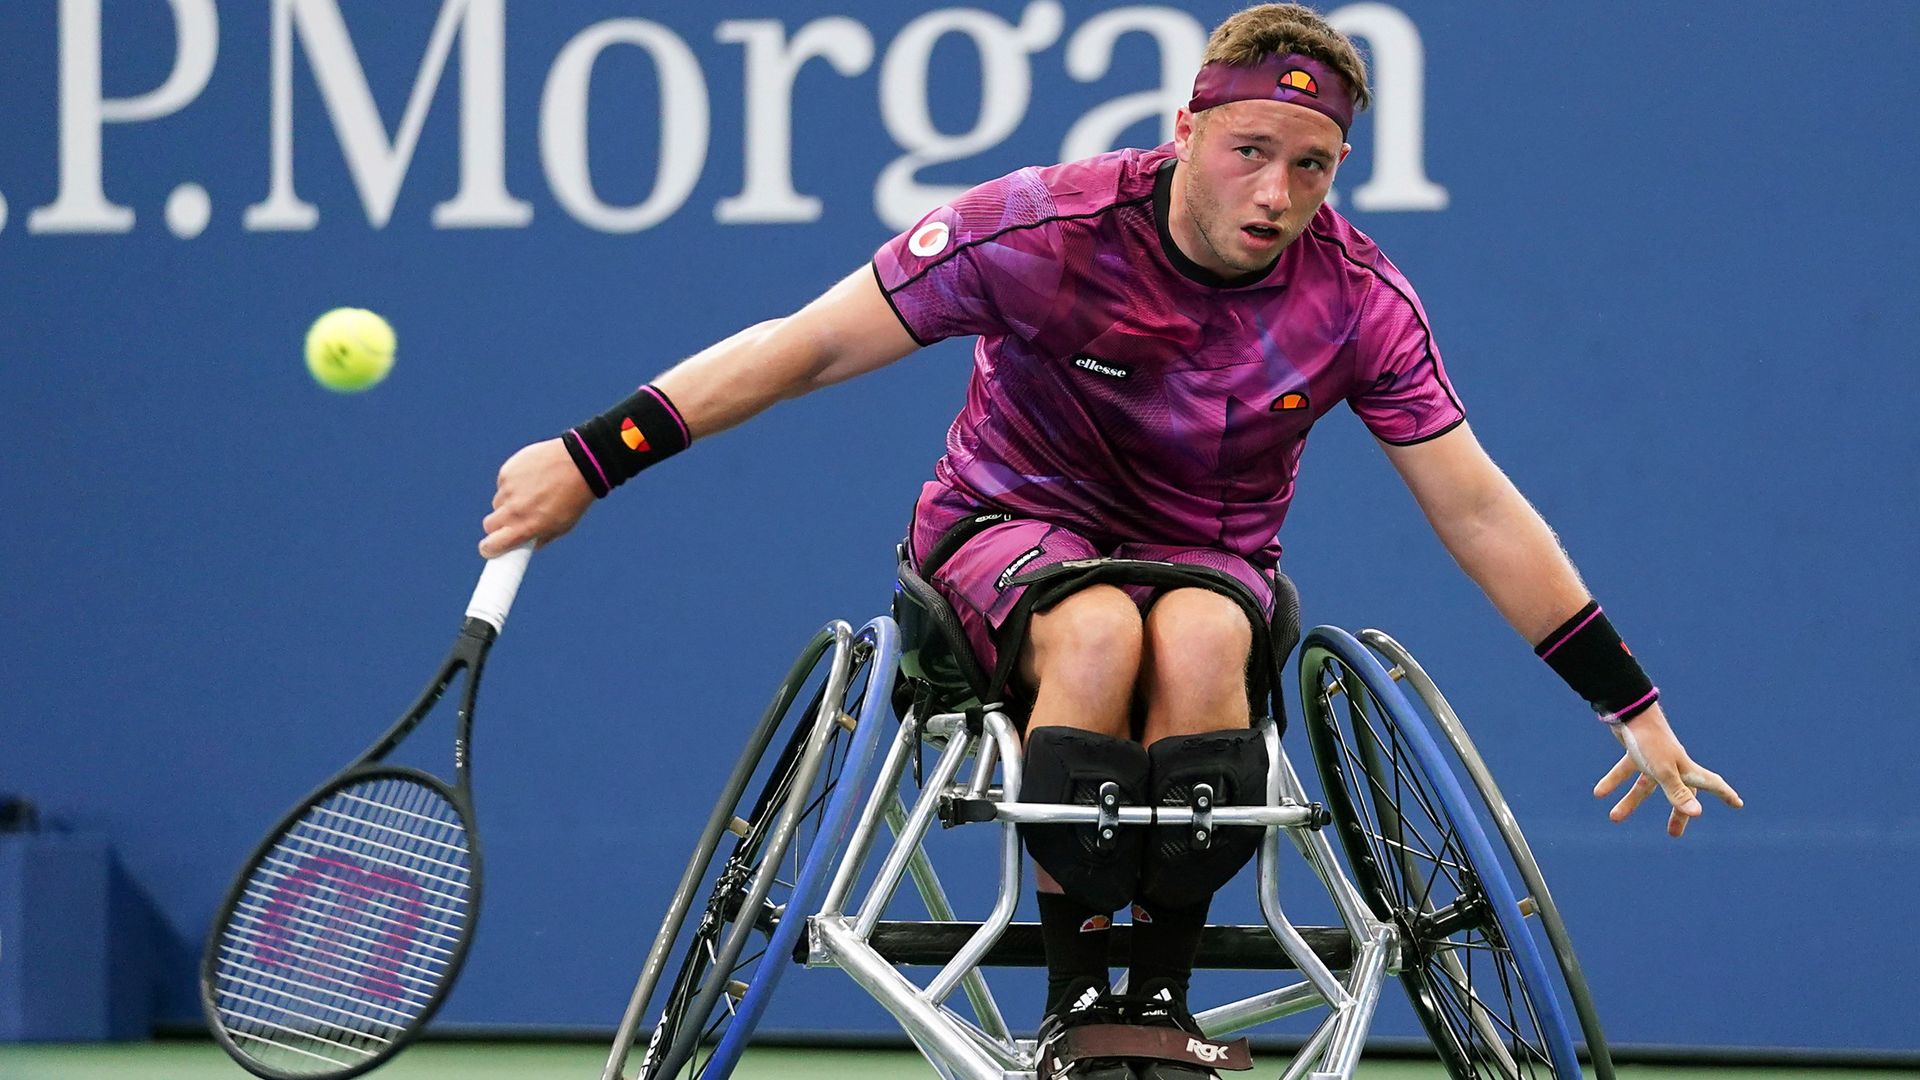 Hewett reaches wheelchair singles & doubles final I Stoiber into girls' semis